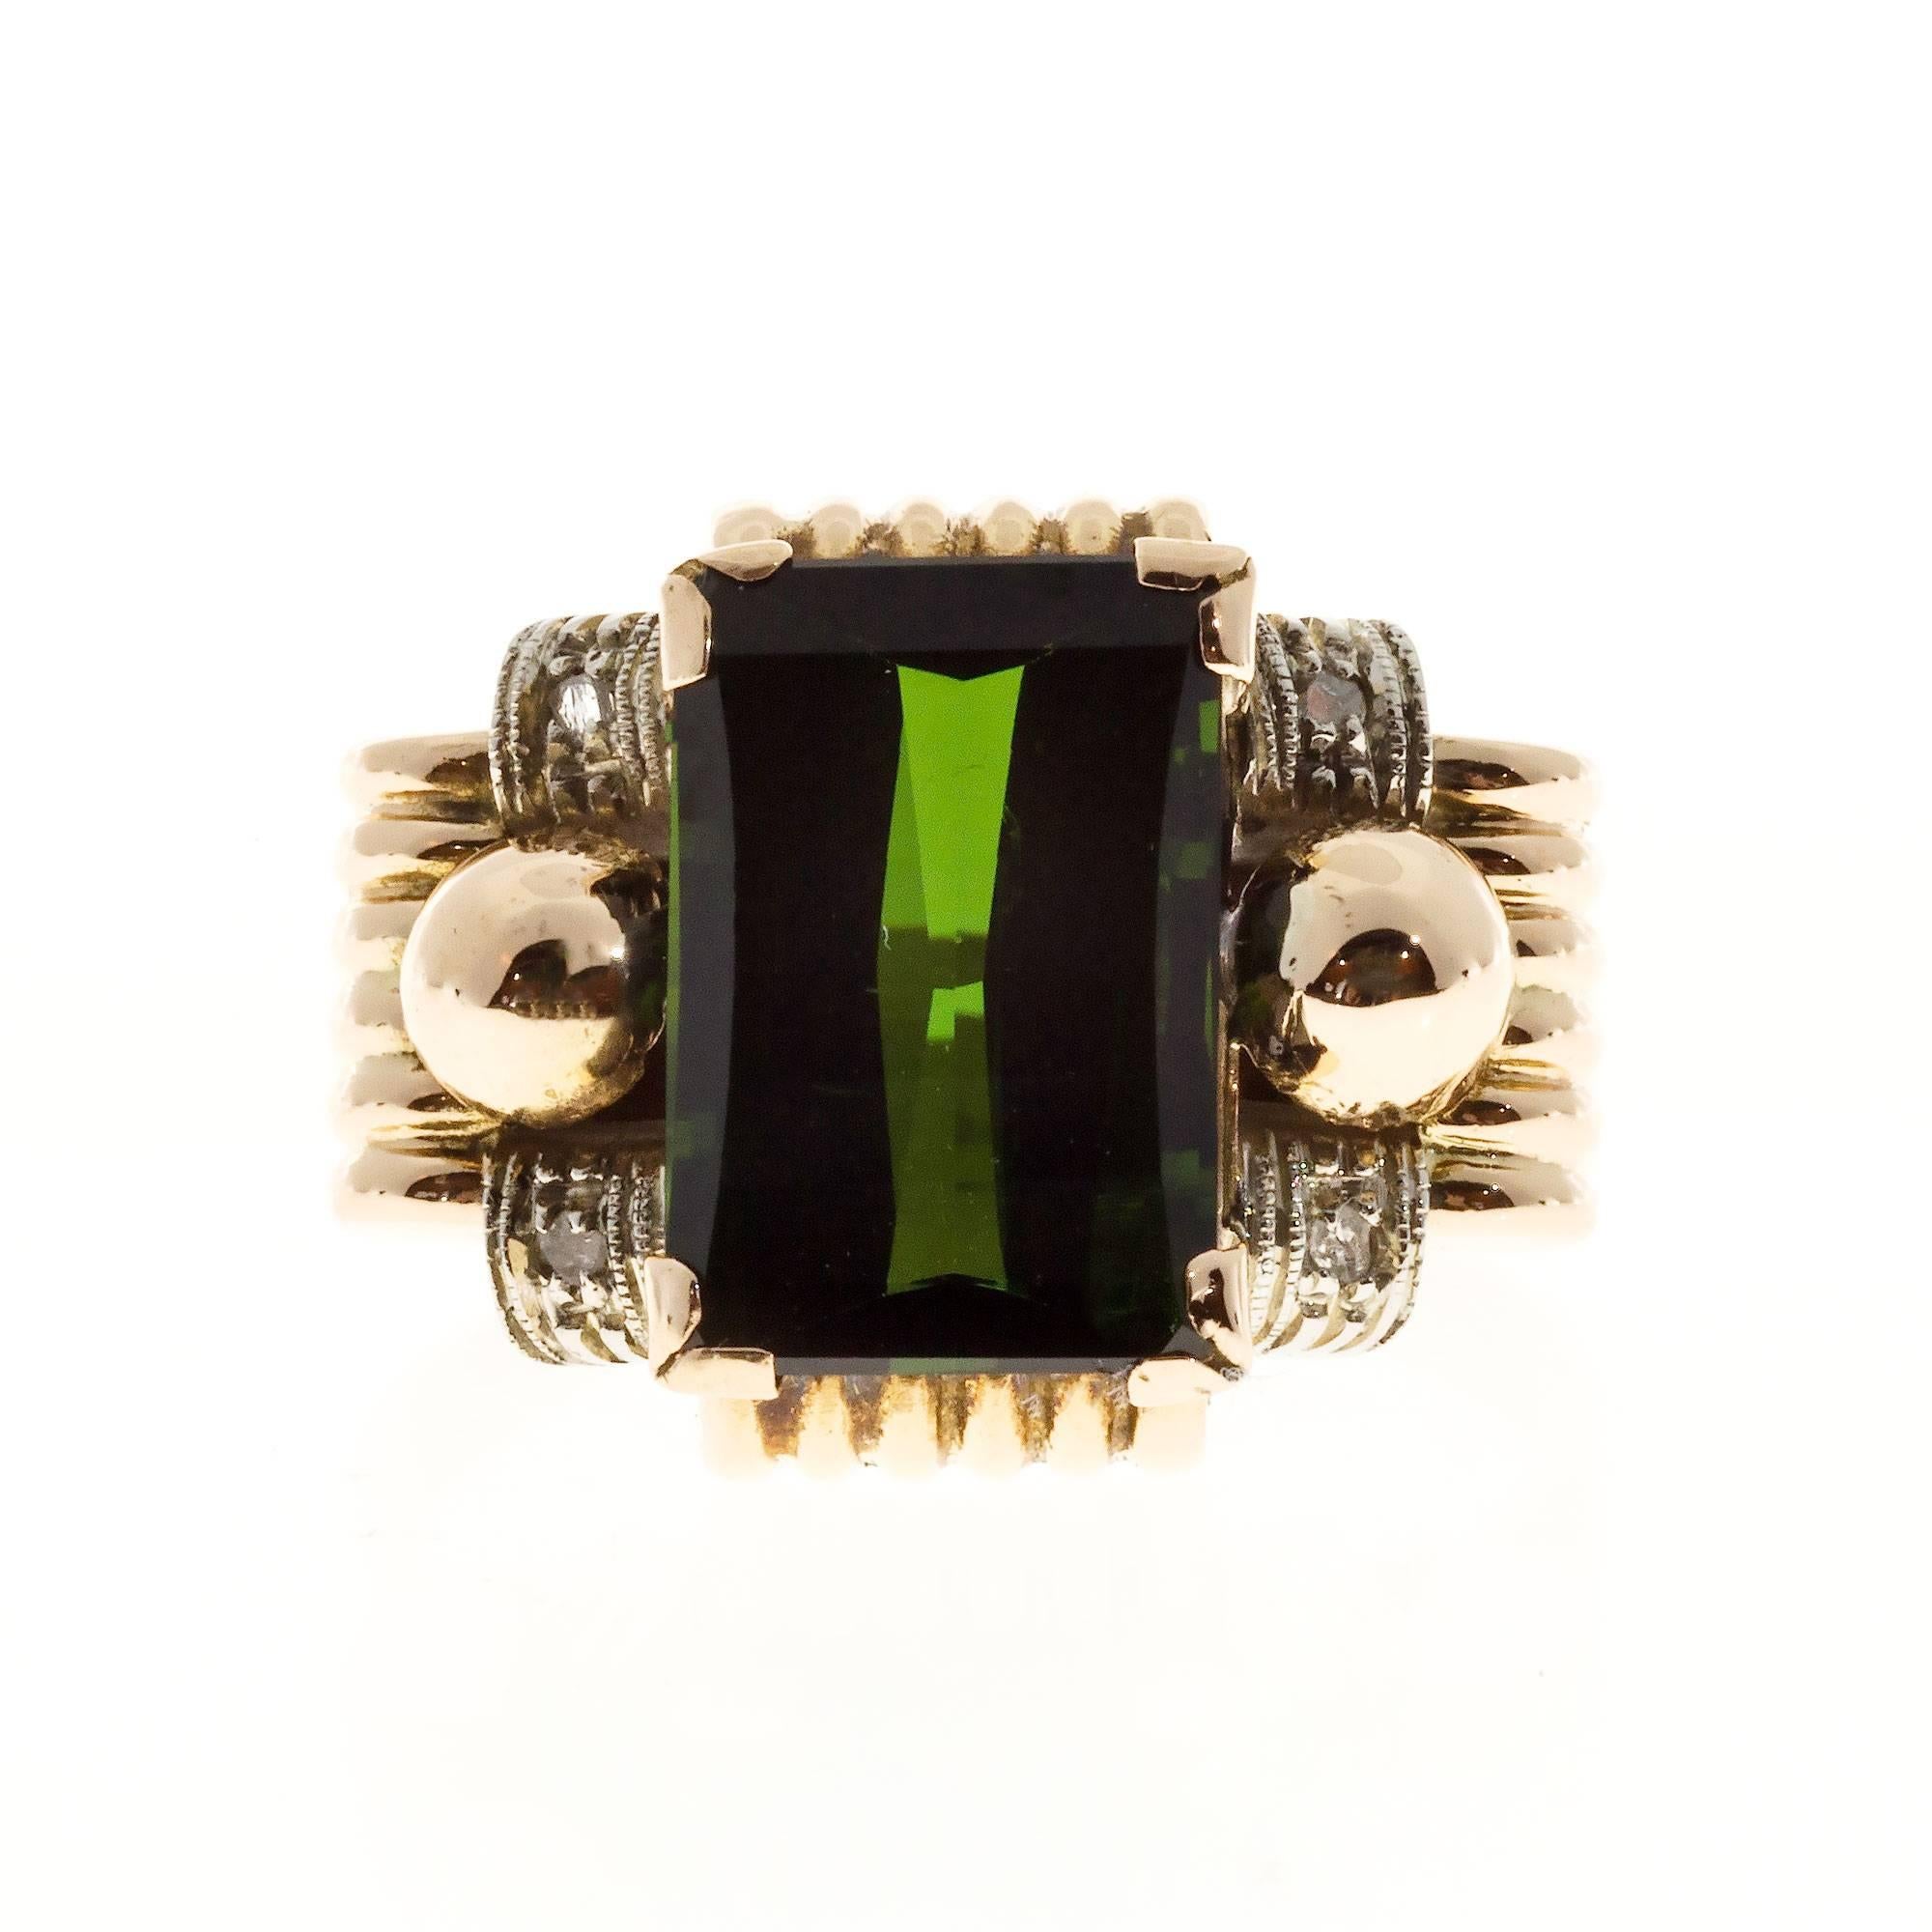 Retro 1940 14k Rose gold ring with white gold diamond accents and a bright deep green roll top Emerald cut Tourmaline.

1 roll top Emerald cut bright green Tourmaline, approx. total weight 6.20cts, SI1
4 rose cut diamonds, approx. total weight